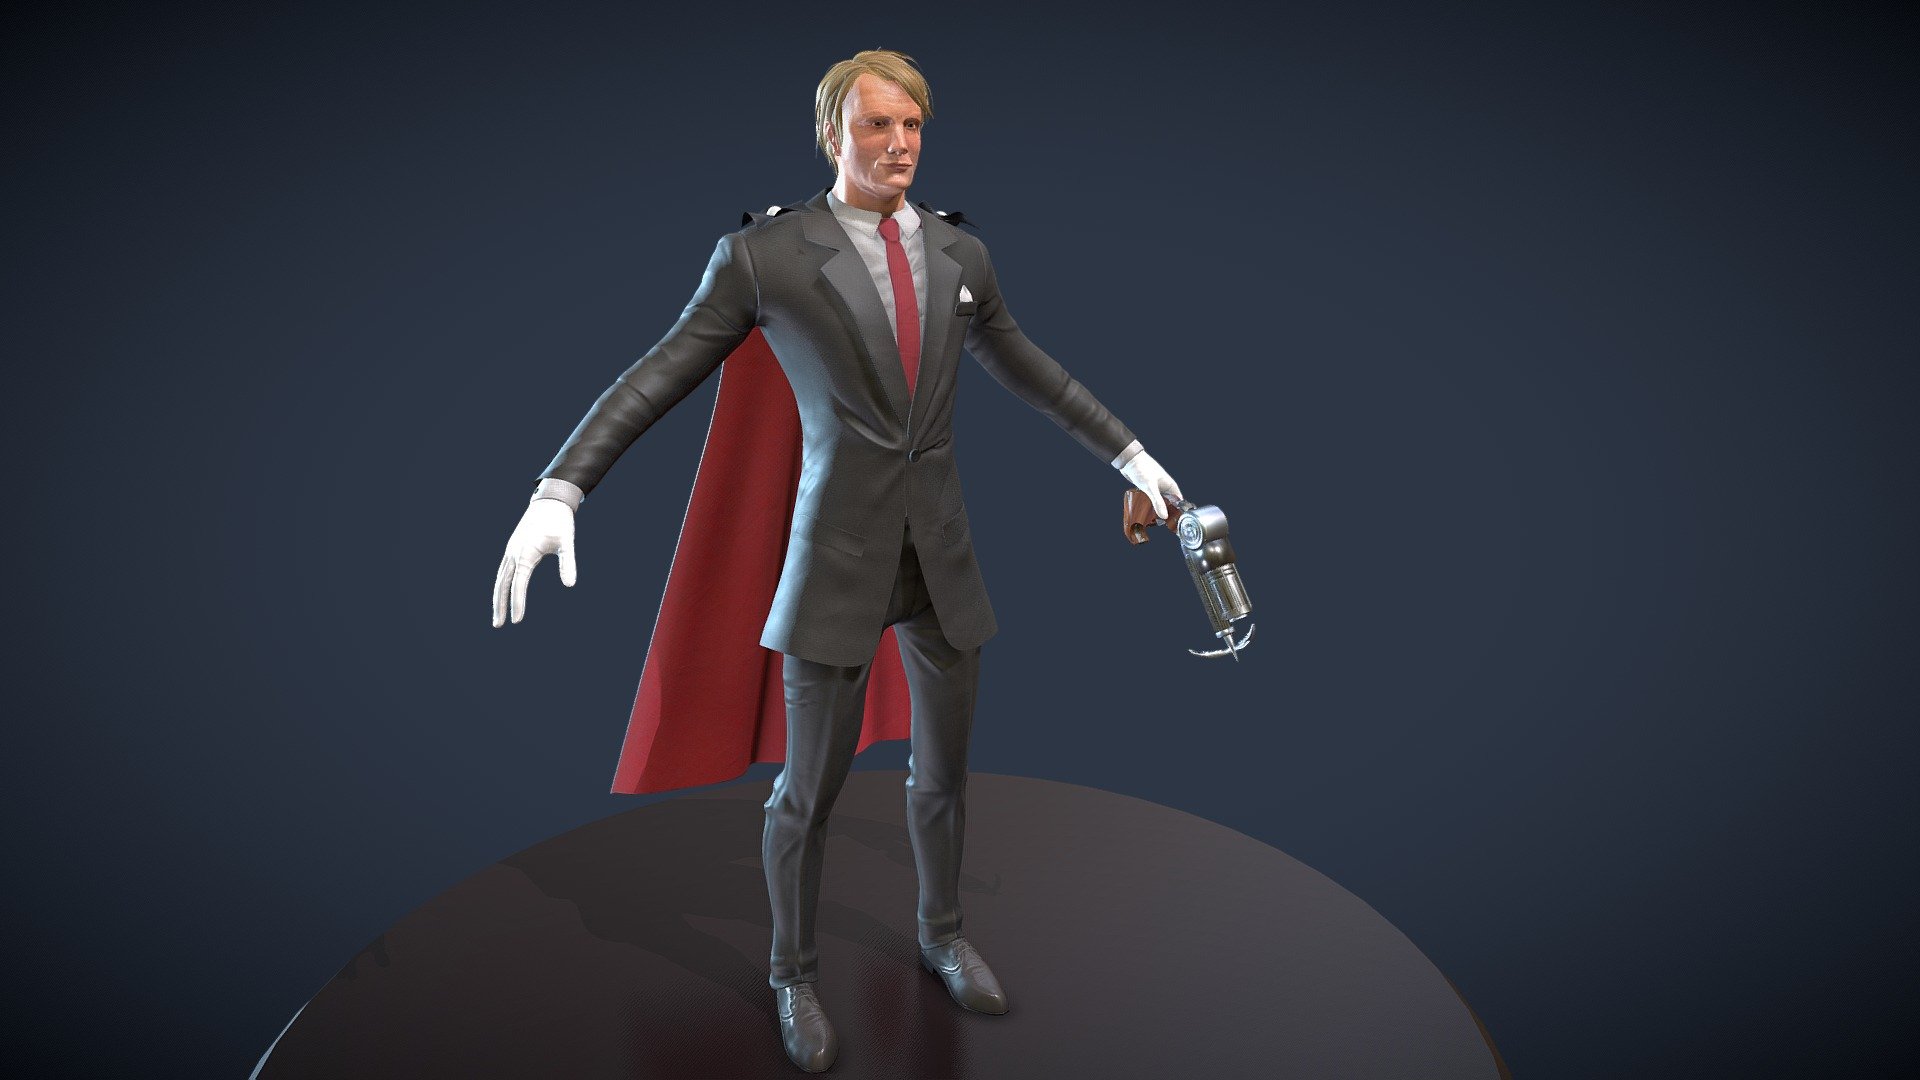 This is my first human character in a realisitc style I made for a school exam. We had to make a character from a celebrity, I choose my favorite actor Mads Mikkelsen and decided to turn him into a gentleman thief a bit like Arsene Lupin.

I used zbrush for the high poly sculpt and the low poly 
3D coat and maya for the Uv's, skinning and export setup 
Substance painter for the texturing
I also integreted my character into a UE4 scene

It was super great to make and I learn a lot from it, even if I'm not really satisfied since the concept is kind of simple, I wasn't to confident for making a complexe character because I'm still a beginer, but with all the things I learned the next one will be much better.

This version has no pose and no hat and mask for a better view of the details of the face.

Hope you find it cool :) - Mads Mikkelsen as a gentleman thief: No pose - 3D model by Hugo.Bessiere 3d model